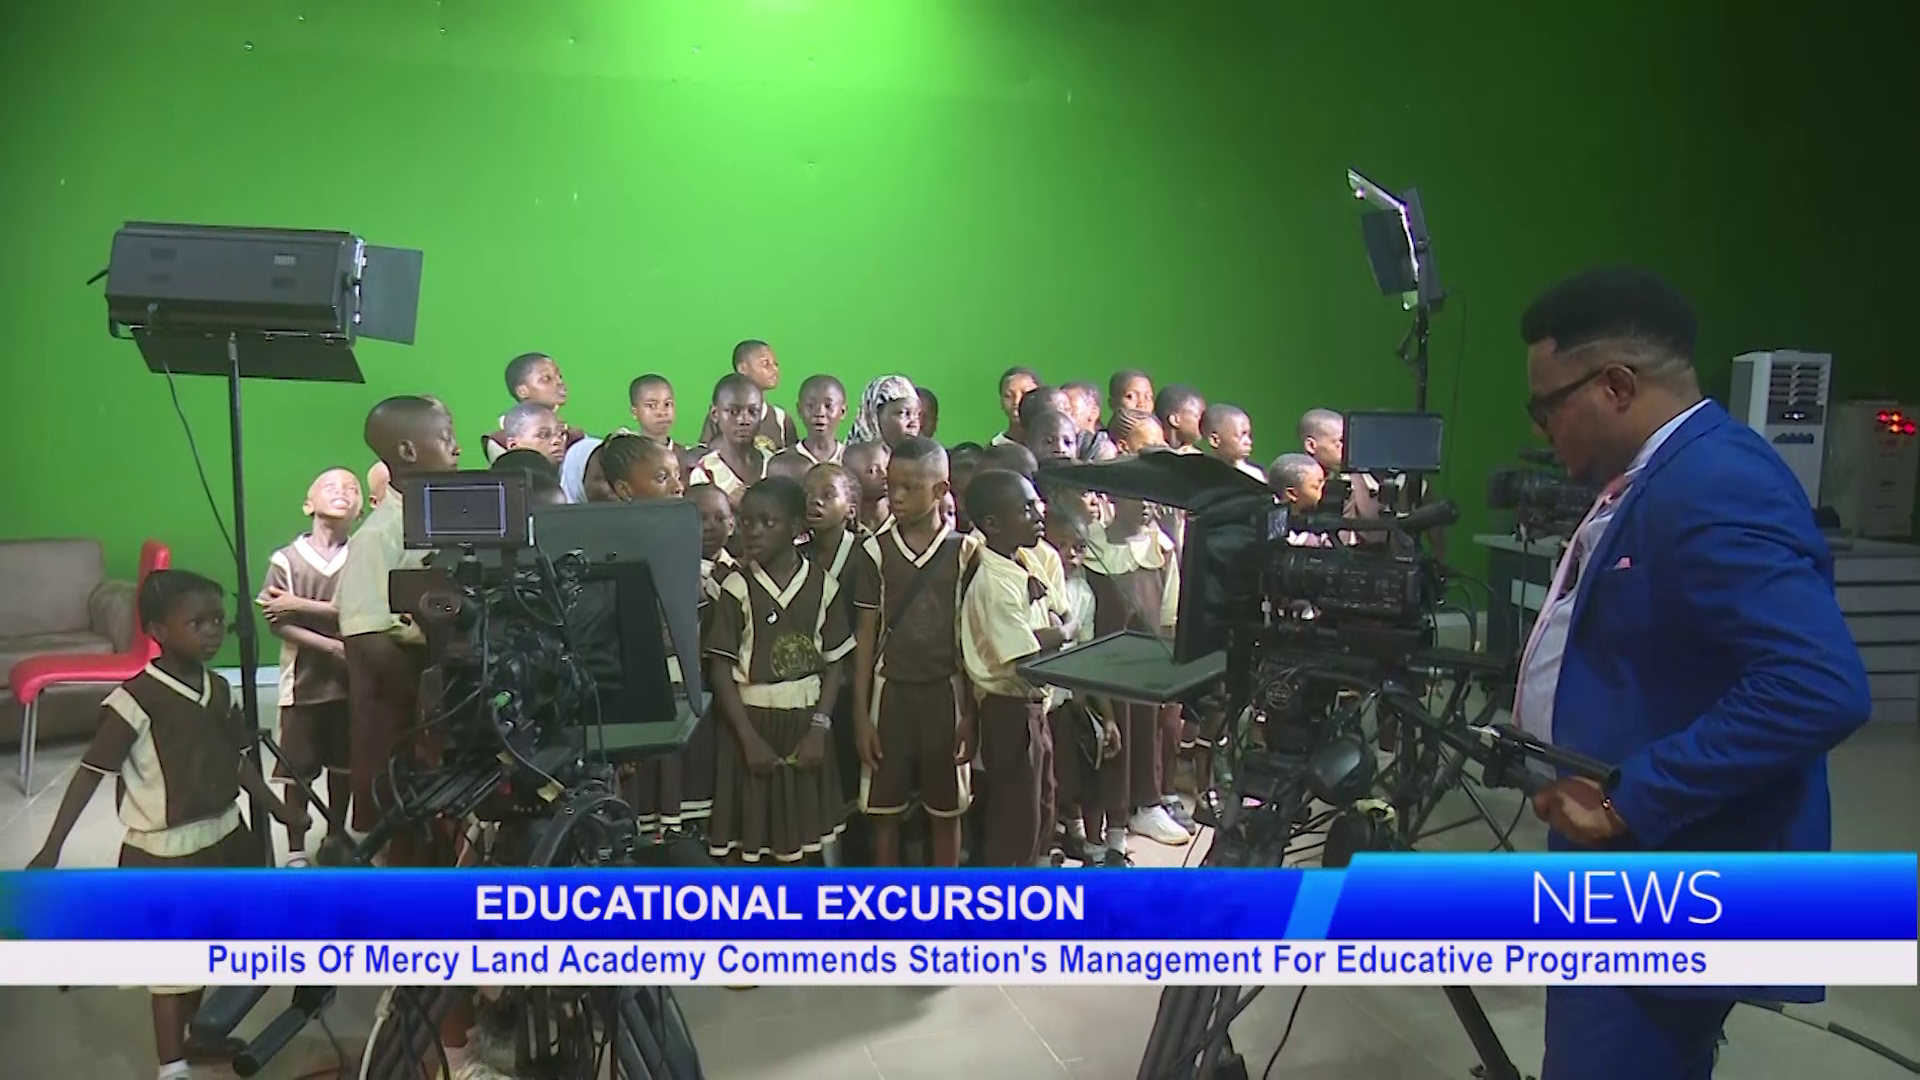 Pupils Of Mercy Land Academy Commends Station’s Management For Educative Programmes